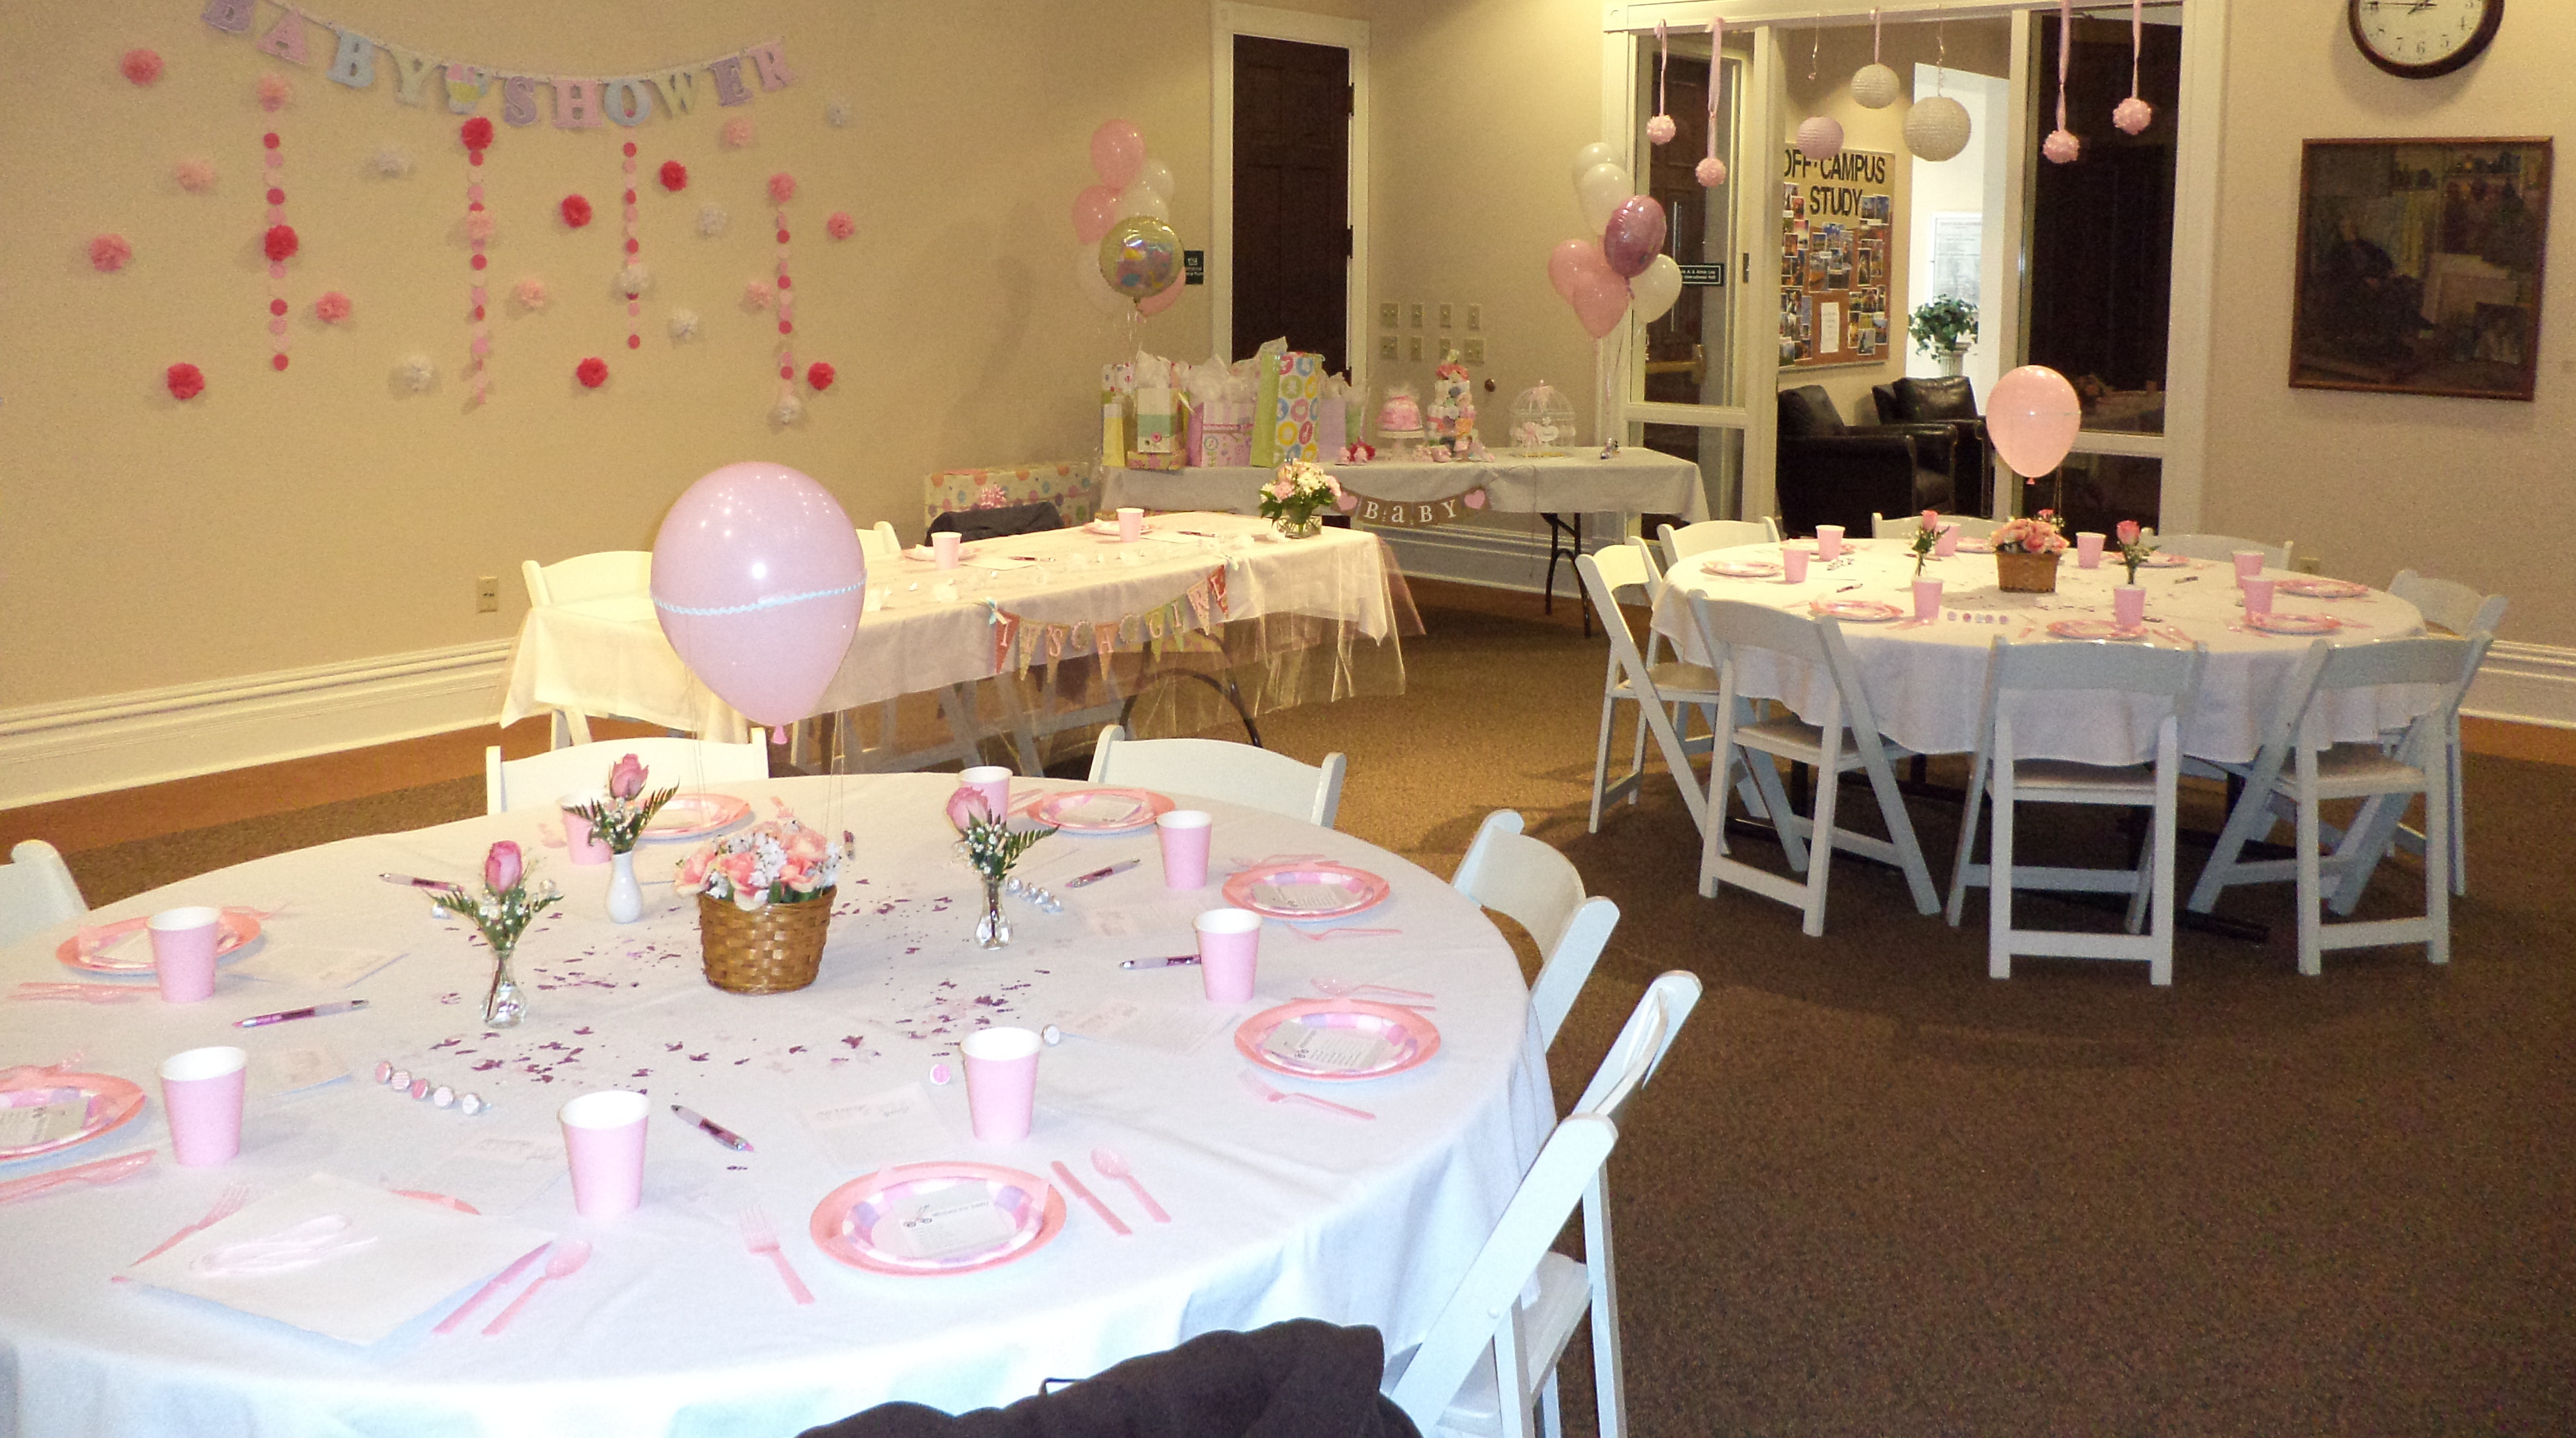 30+ Dollar Store Baby Shower Ideas That Look Amazing - HubPages